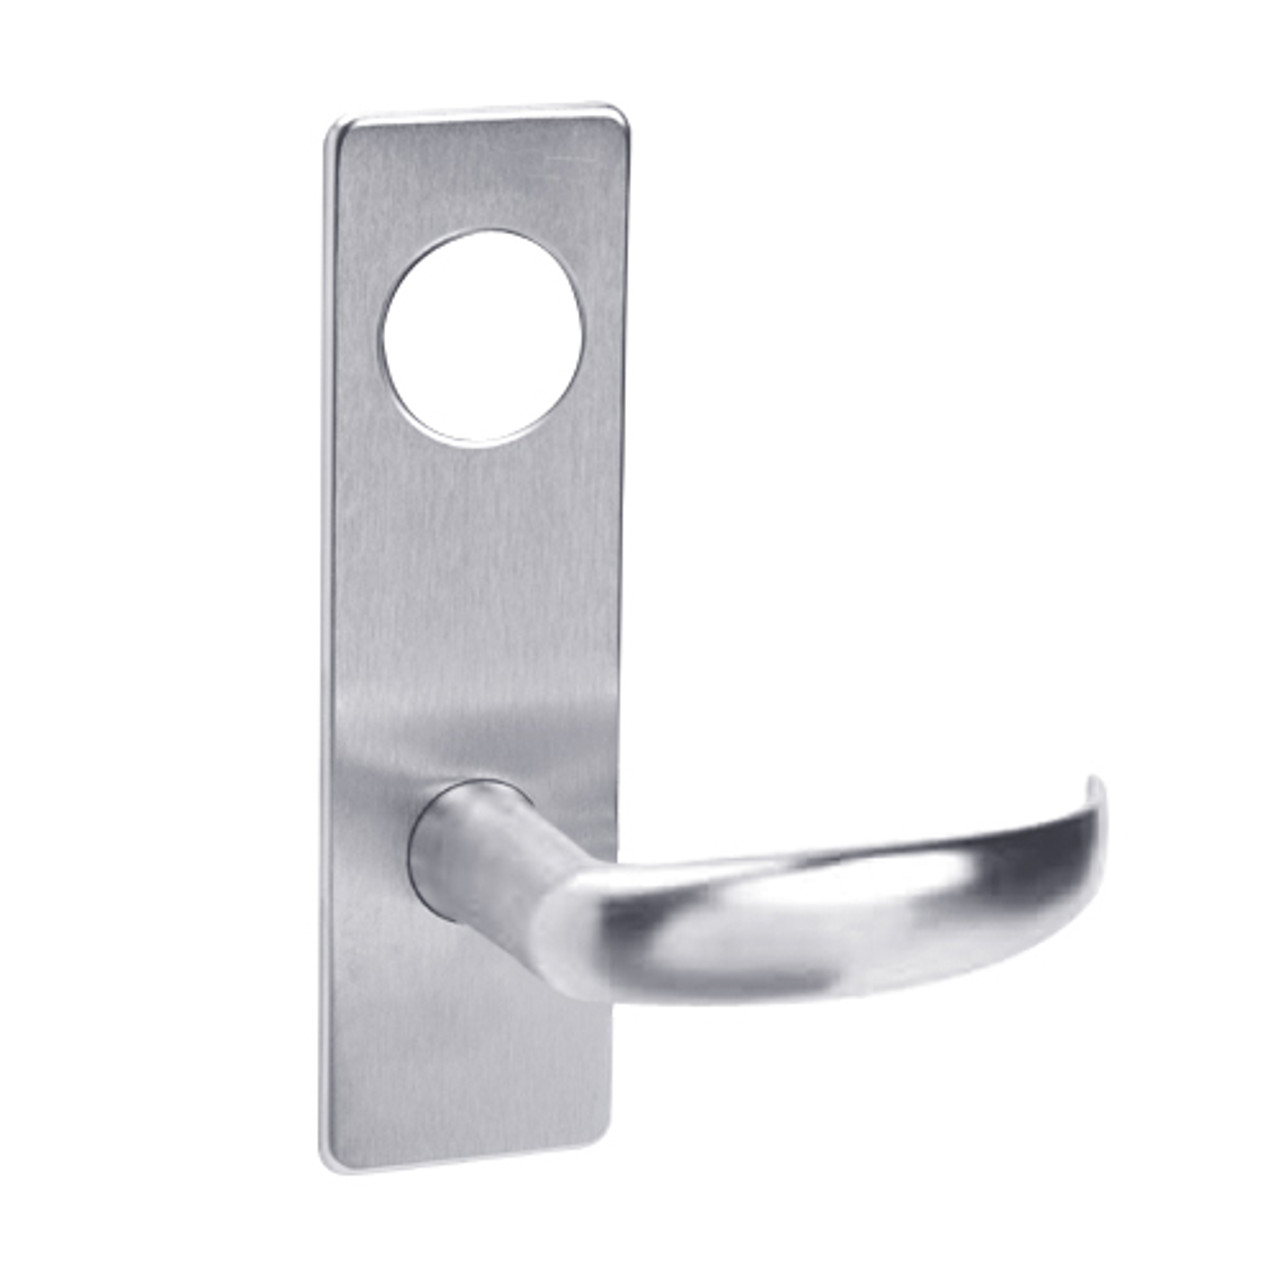 ML2024-PSR-625-M31 Corbin Russwin ML2000 Series Mortise Entrance Trim Pack with Princeton Lever in Bright Chrome